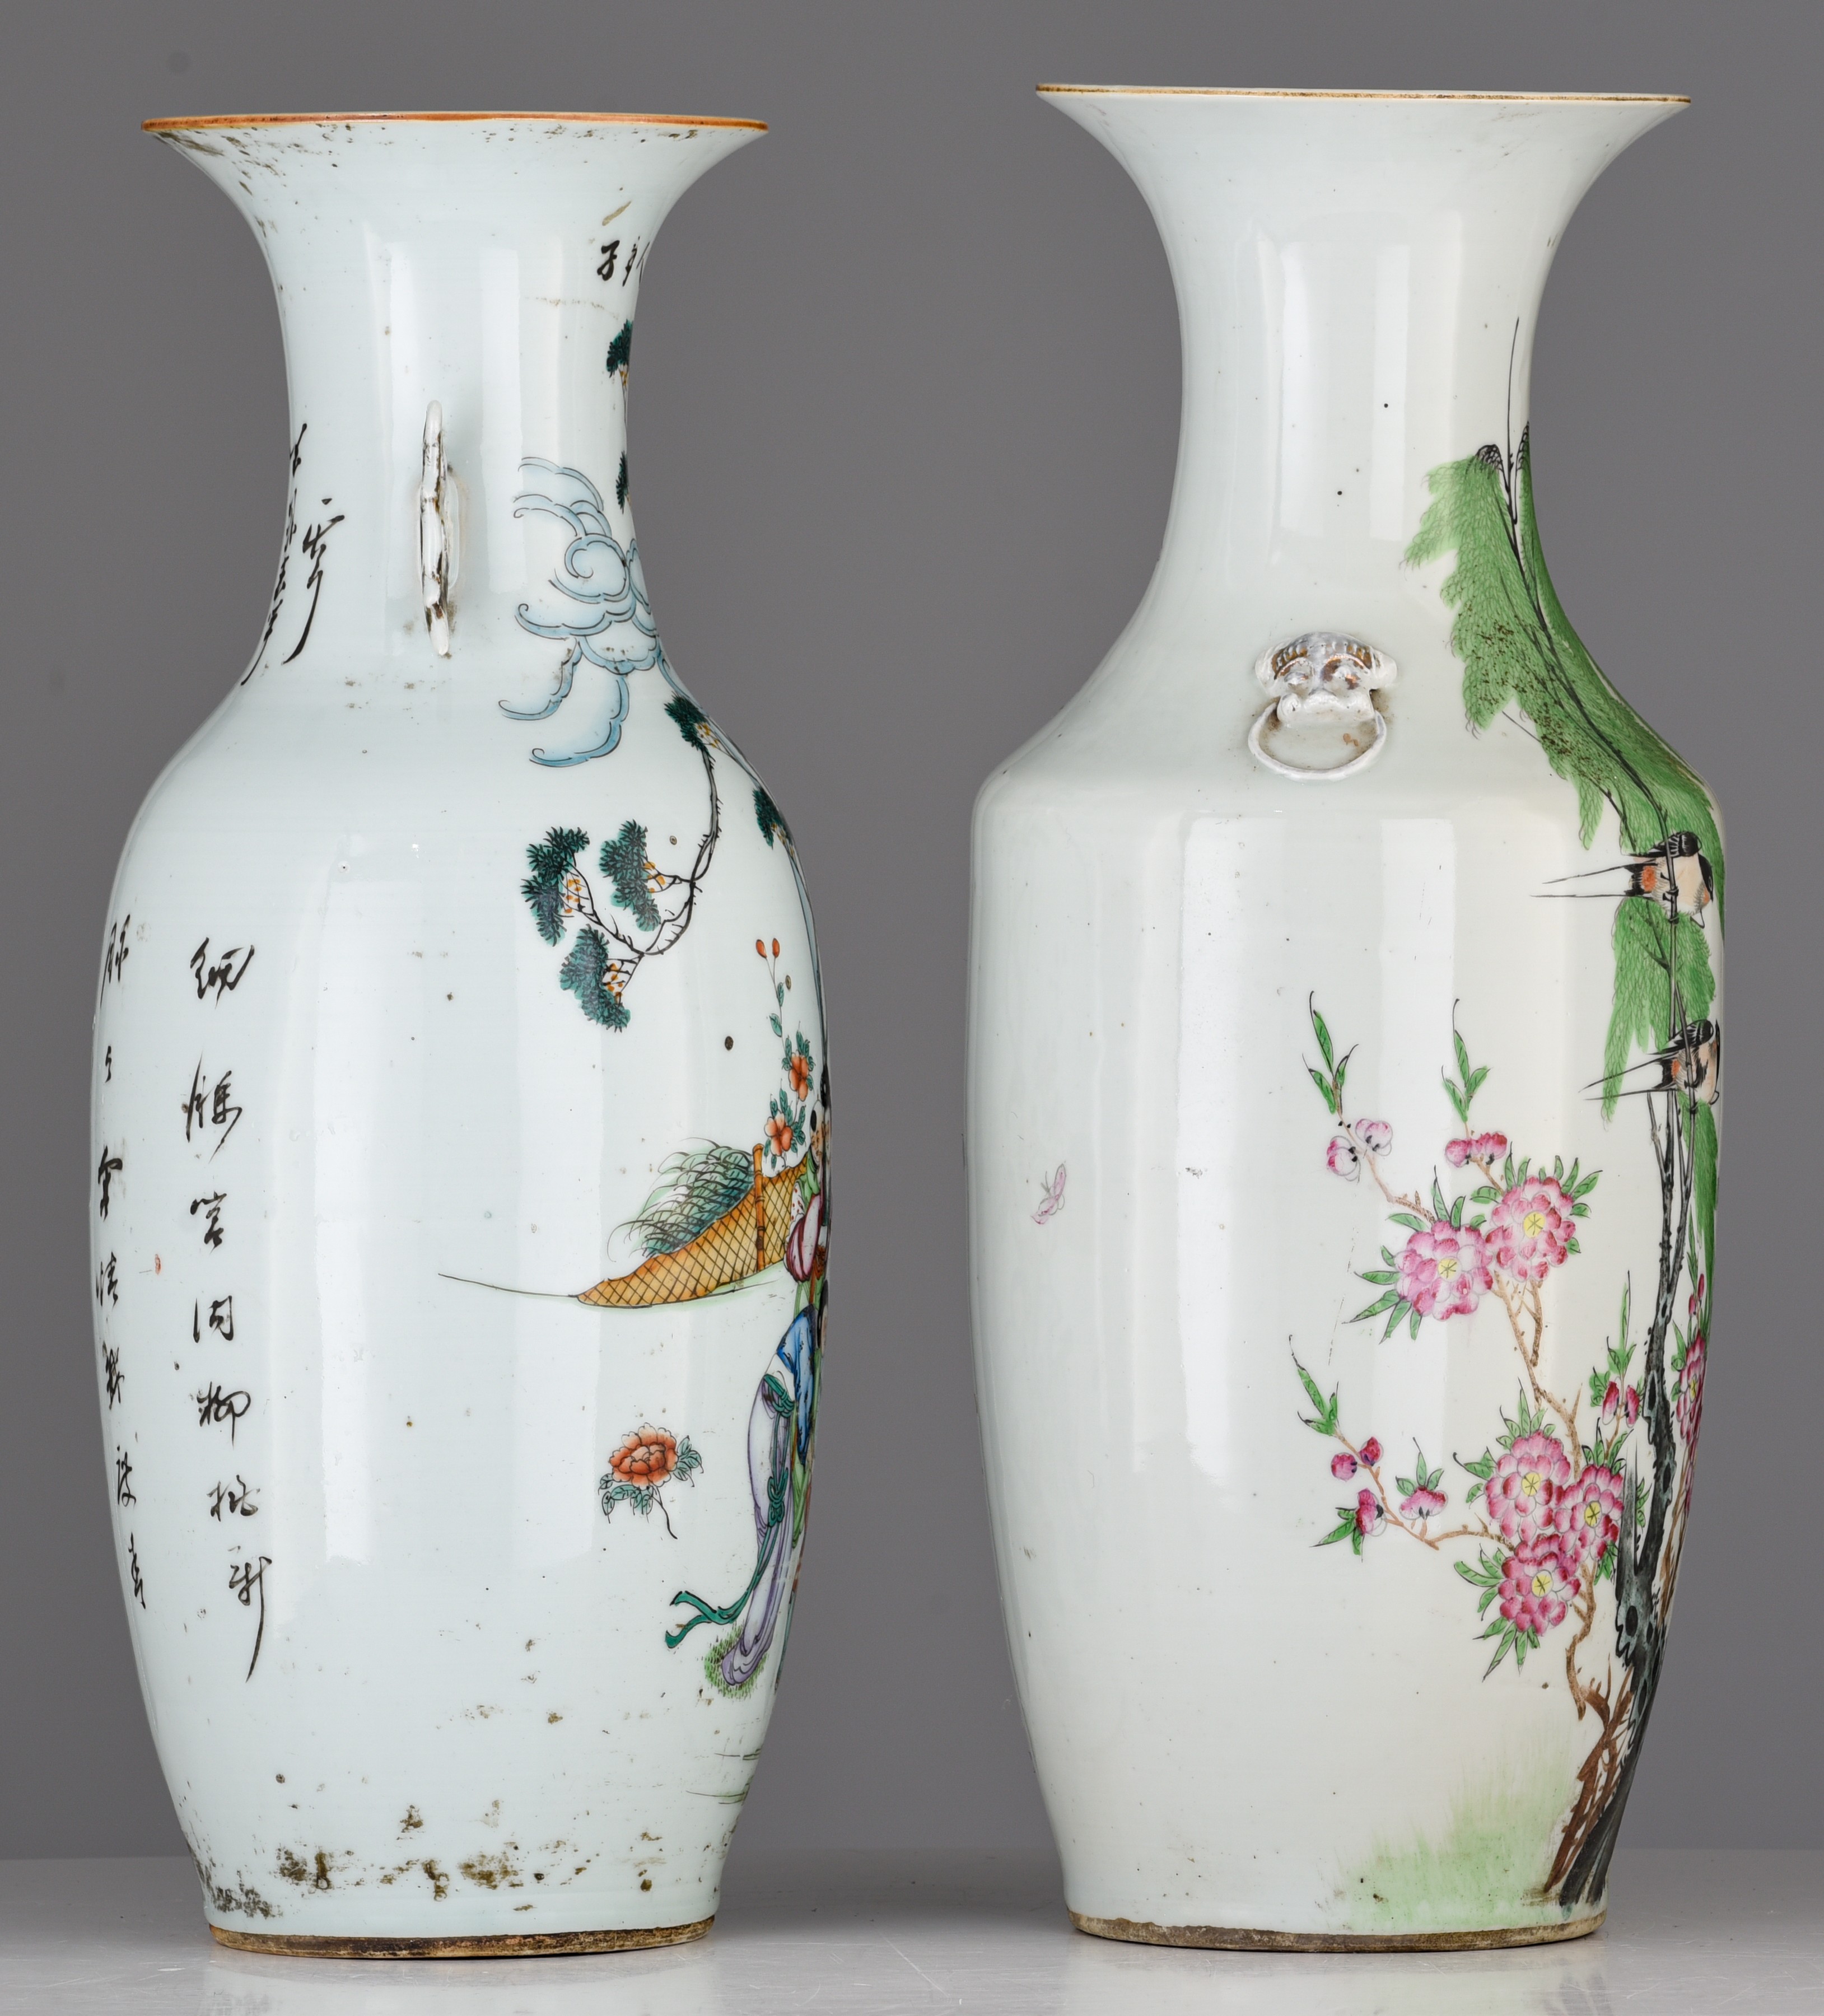 Two Chinese famille rose vases, one with a signed text, Republic period, H 57 - 57,5 cm - Image 5 of 7